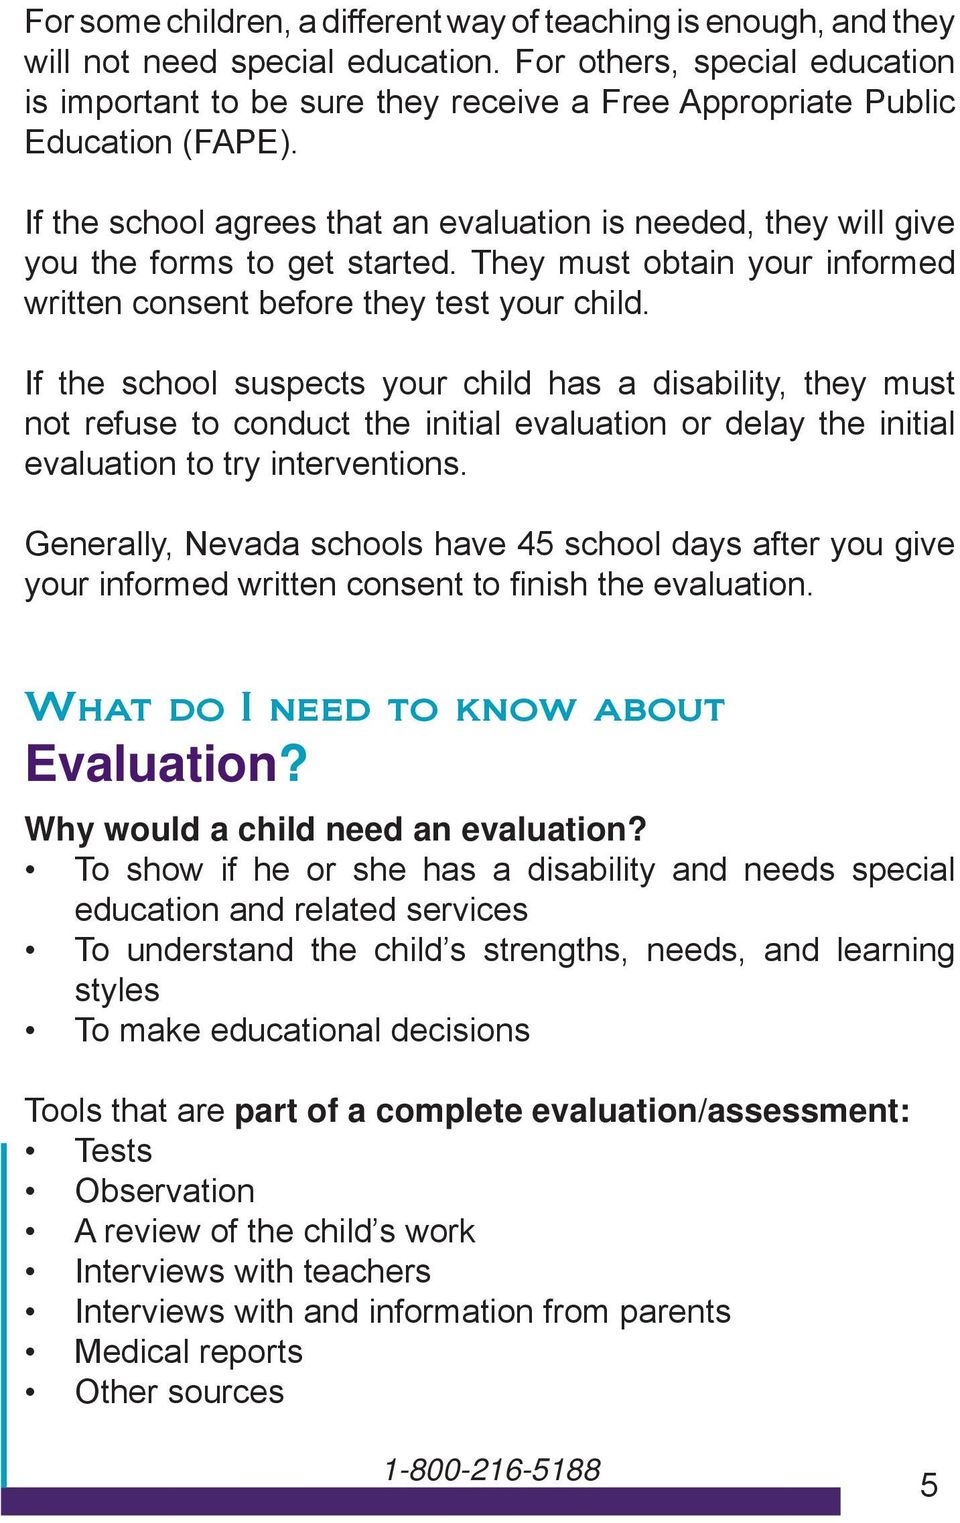 If the school agrees that an evaluation is needed, they will give you the forms to get started. They must obtain your informed written consent before they test your child.